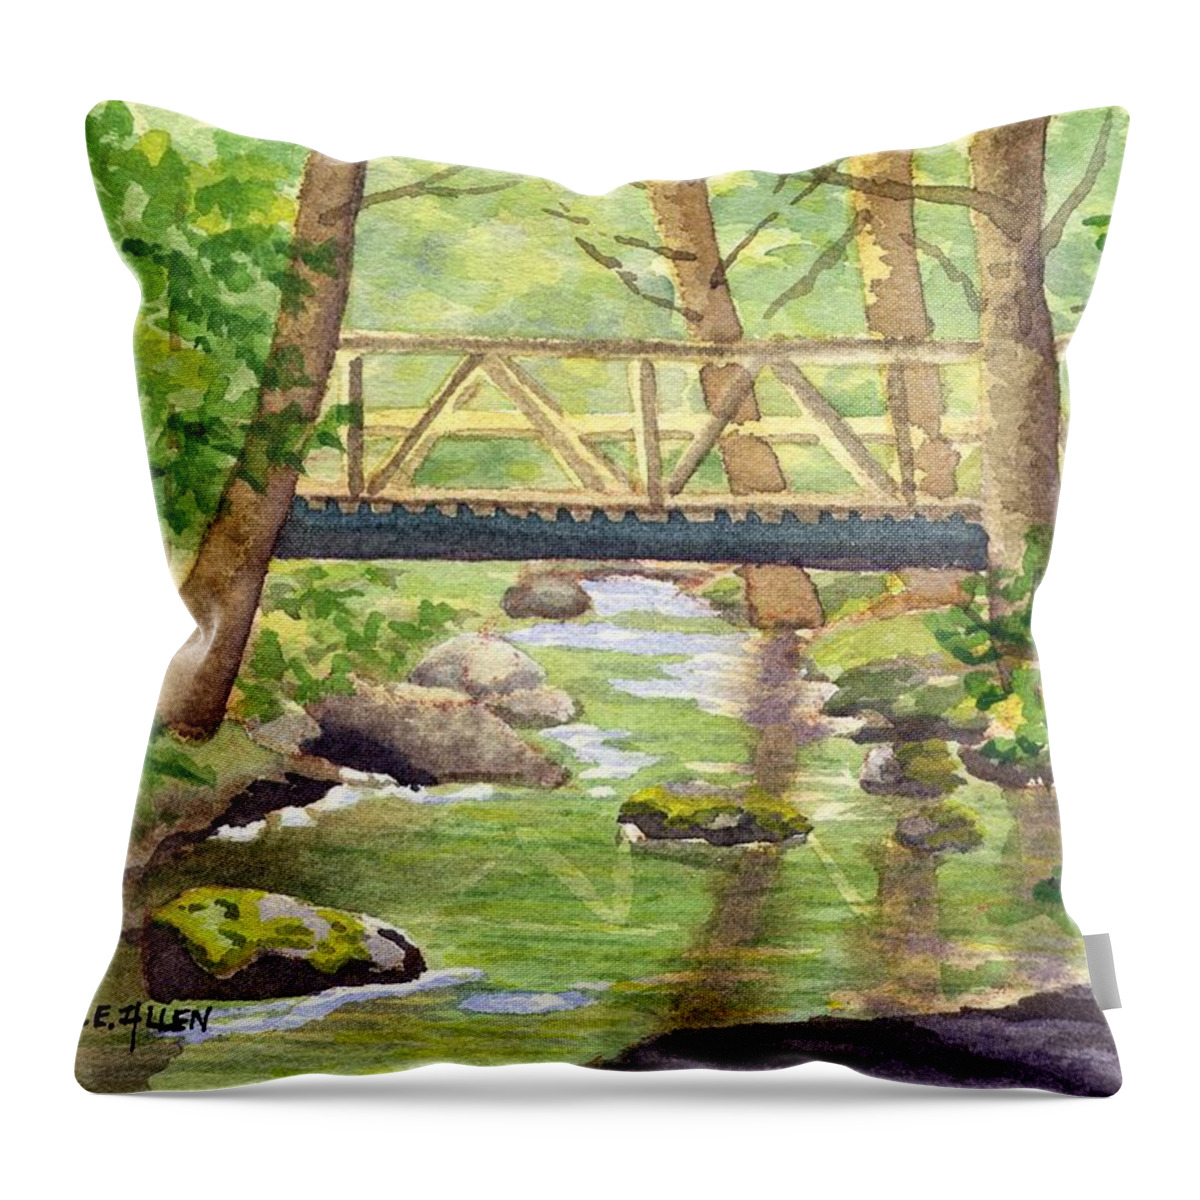 Stream Throw Pillow featuring the painting Tuckers Brook by Sharon E Allen